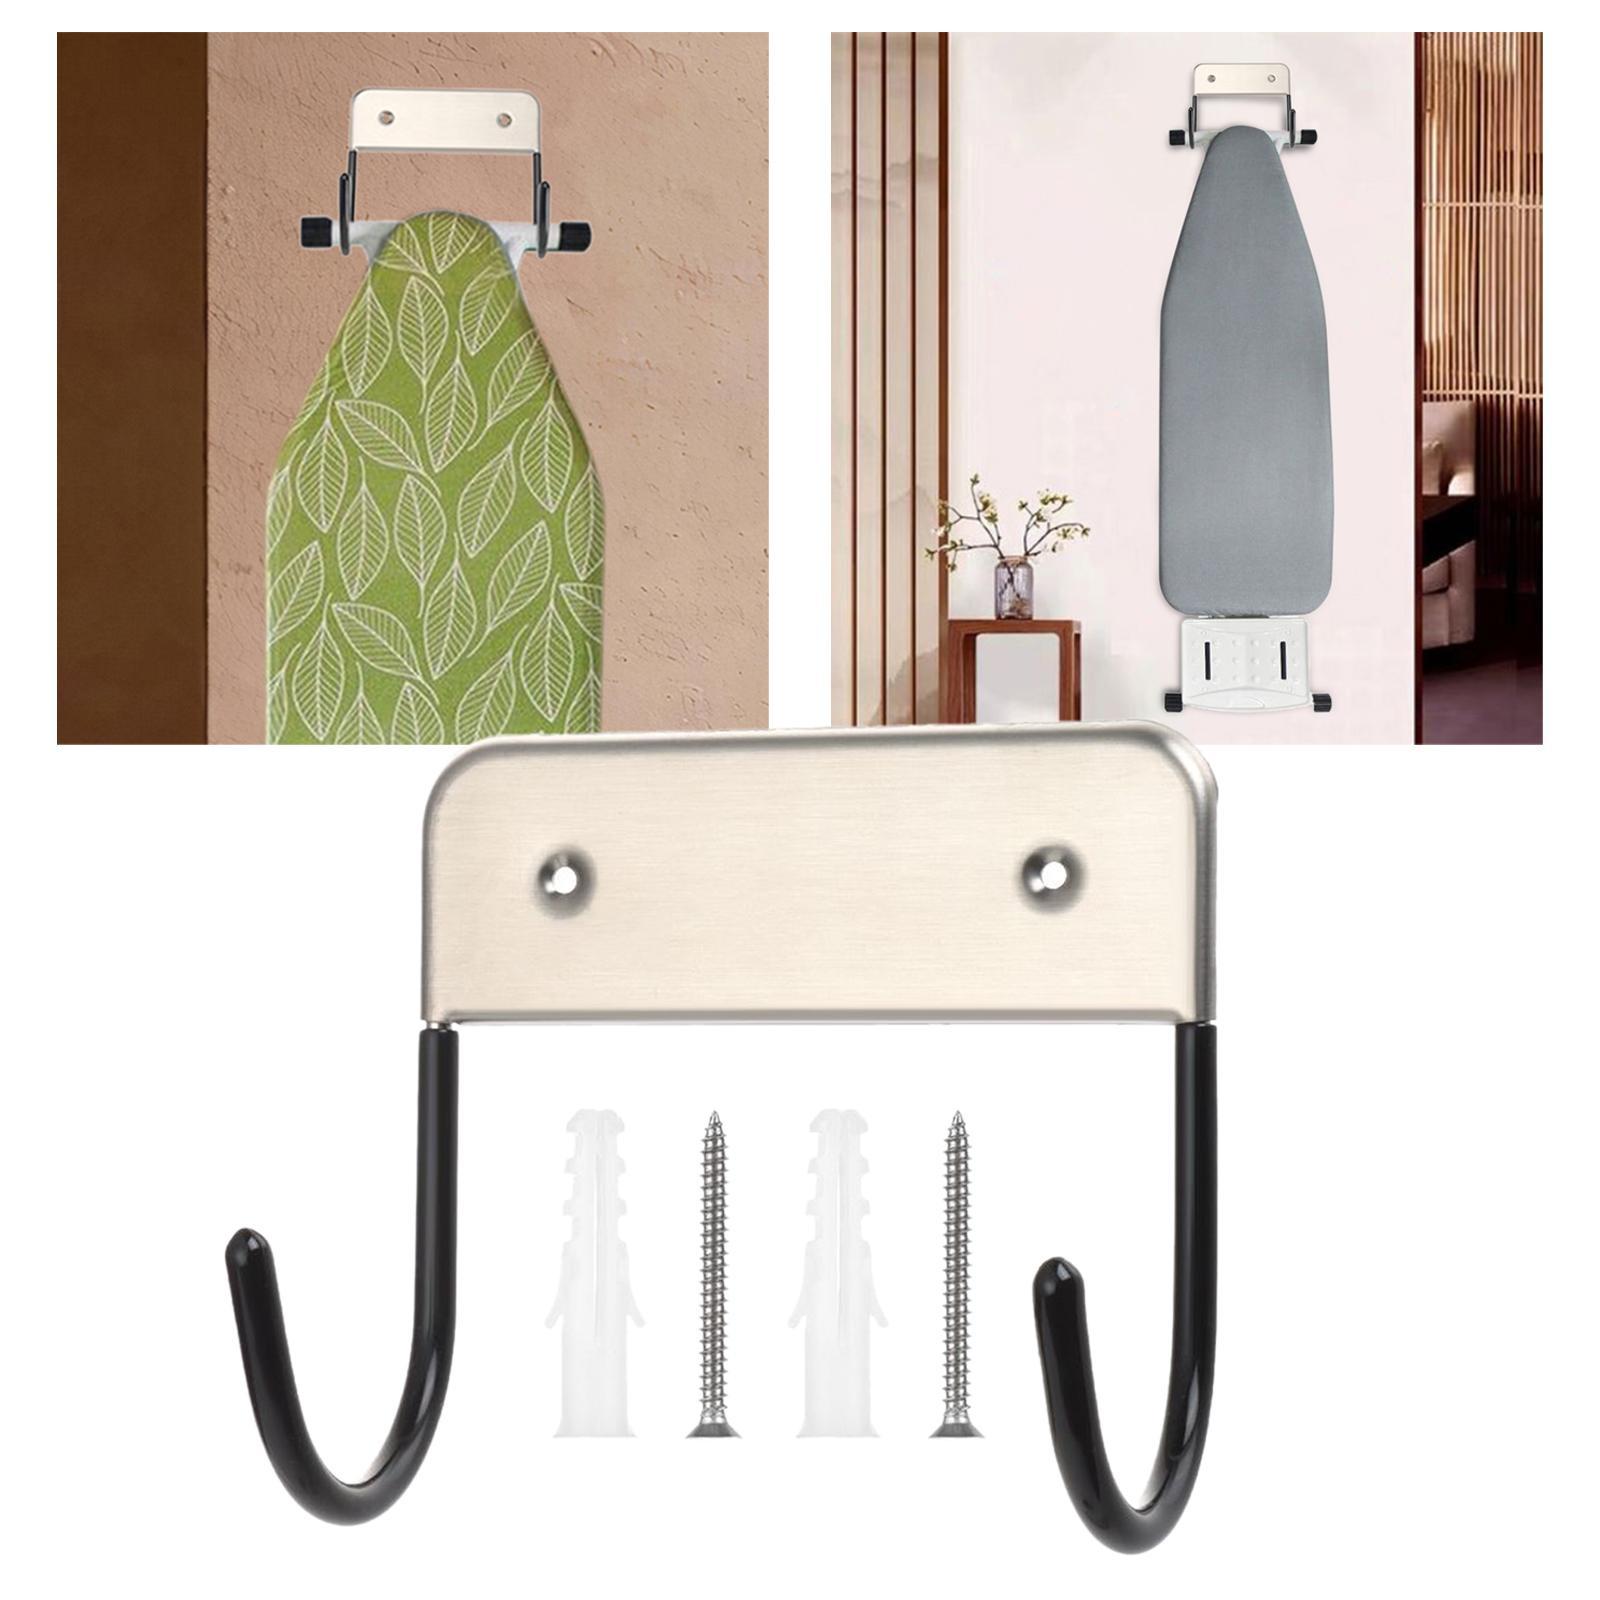 Home Ironing Board Holder Wall Hanging Removable for Home Door Bathroom